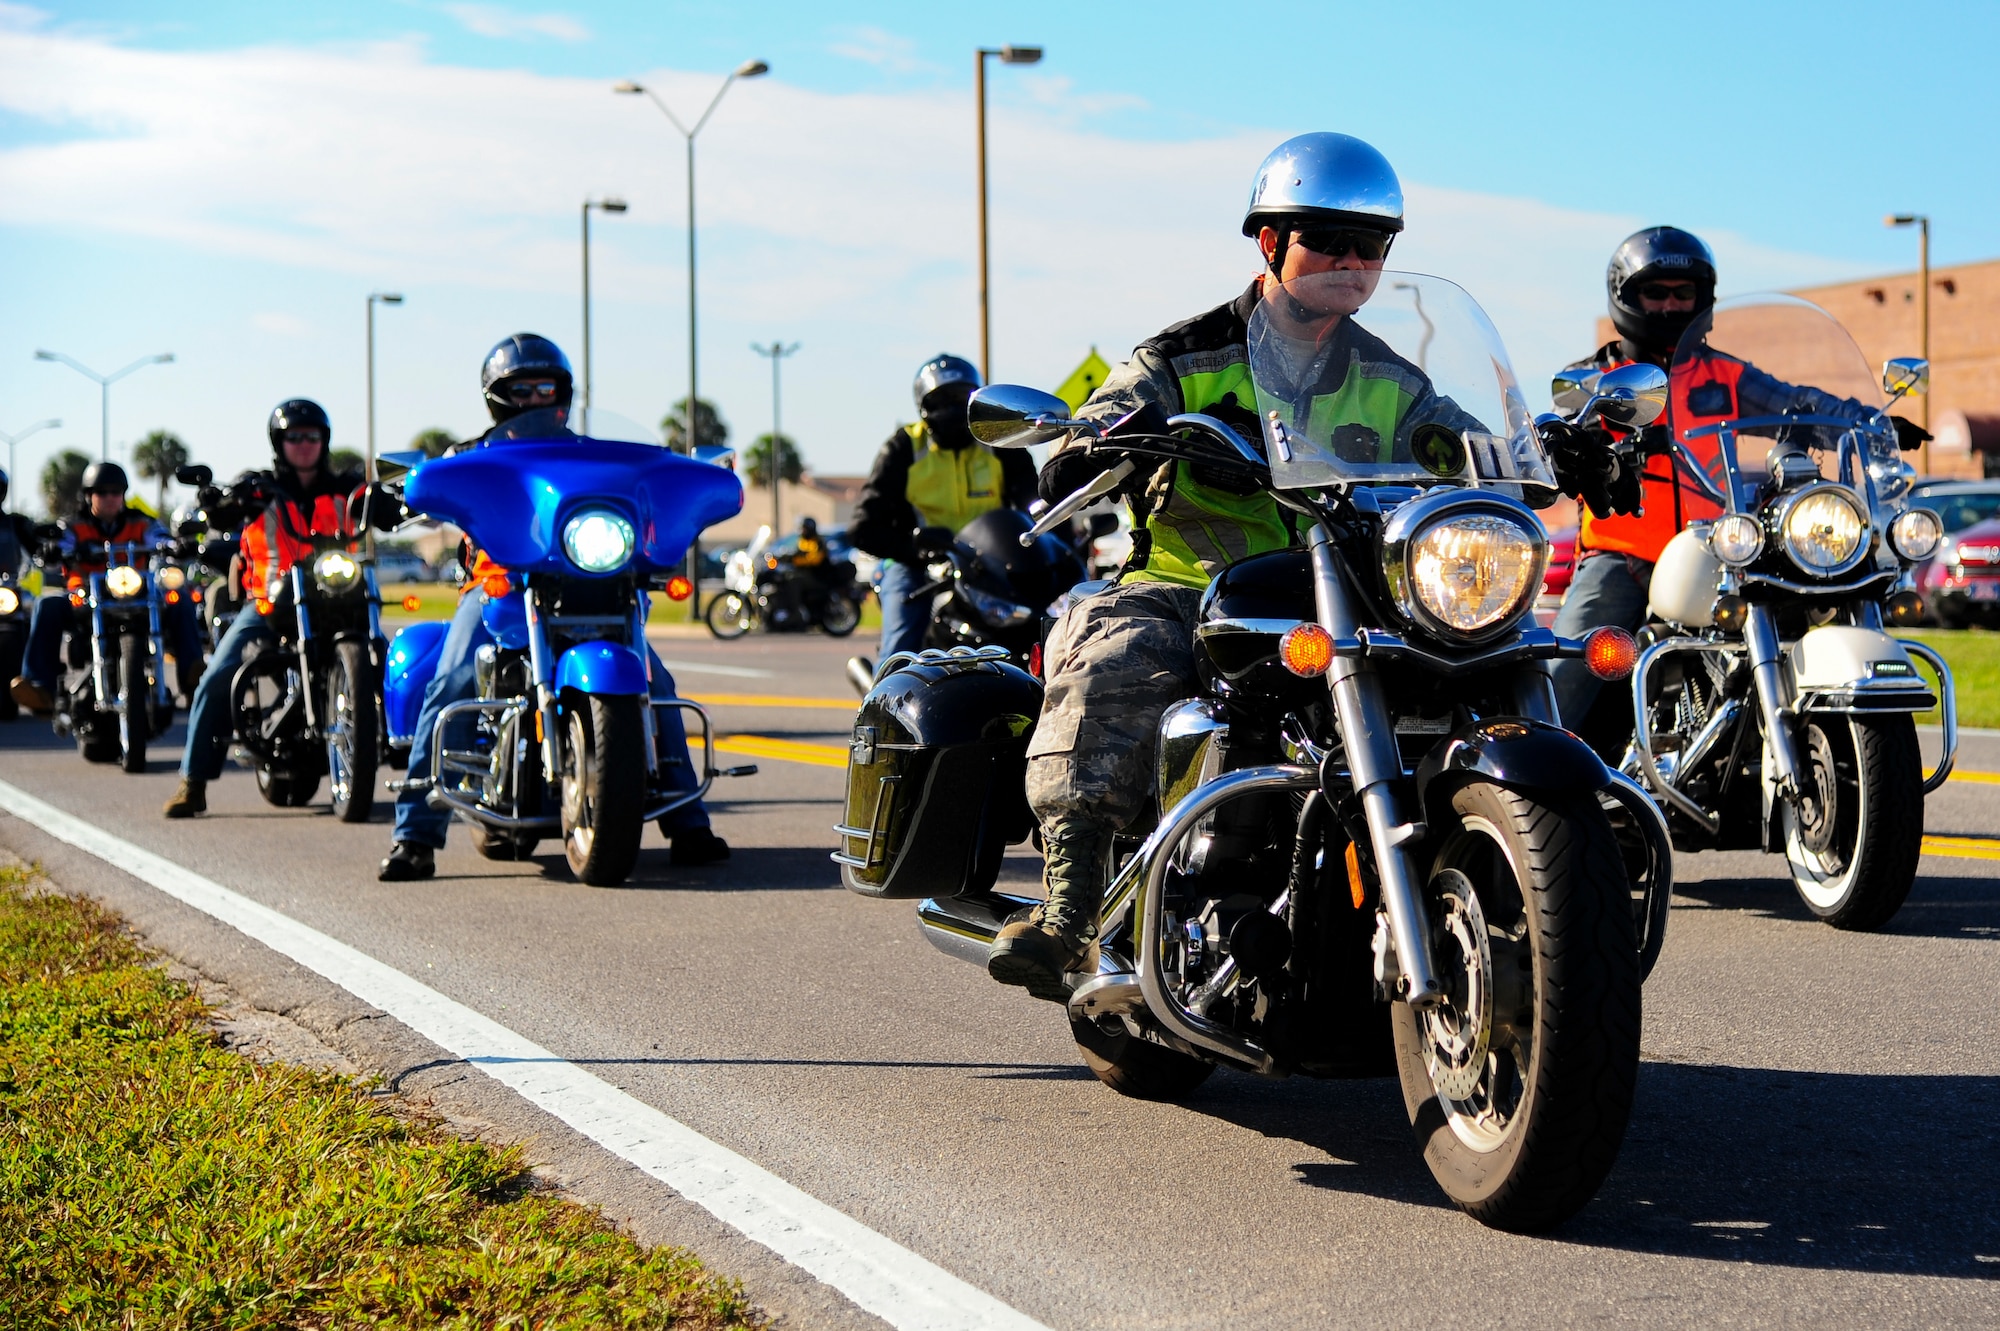 Members from MacDill Air Force Base, Fla., ride their motorcycles during a motorcycle safety, mentoring, and Combined Federal Campaign awareness ride Nov. 1, 2013. More than 60 members from MacDill came together to emphasize motorcycle safety, build camaraderie between members of Team MacDill and provide a kickoff event for the CFC. (U.S. Air Force photo by Airman 1st Class Ned T. Johnston/Released)